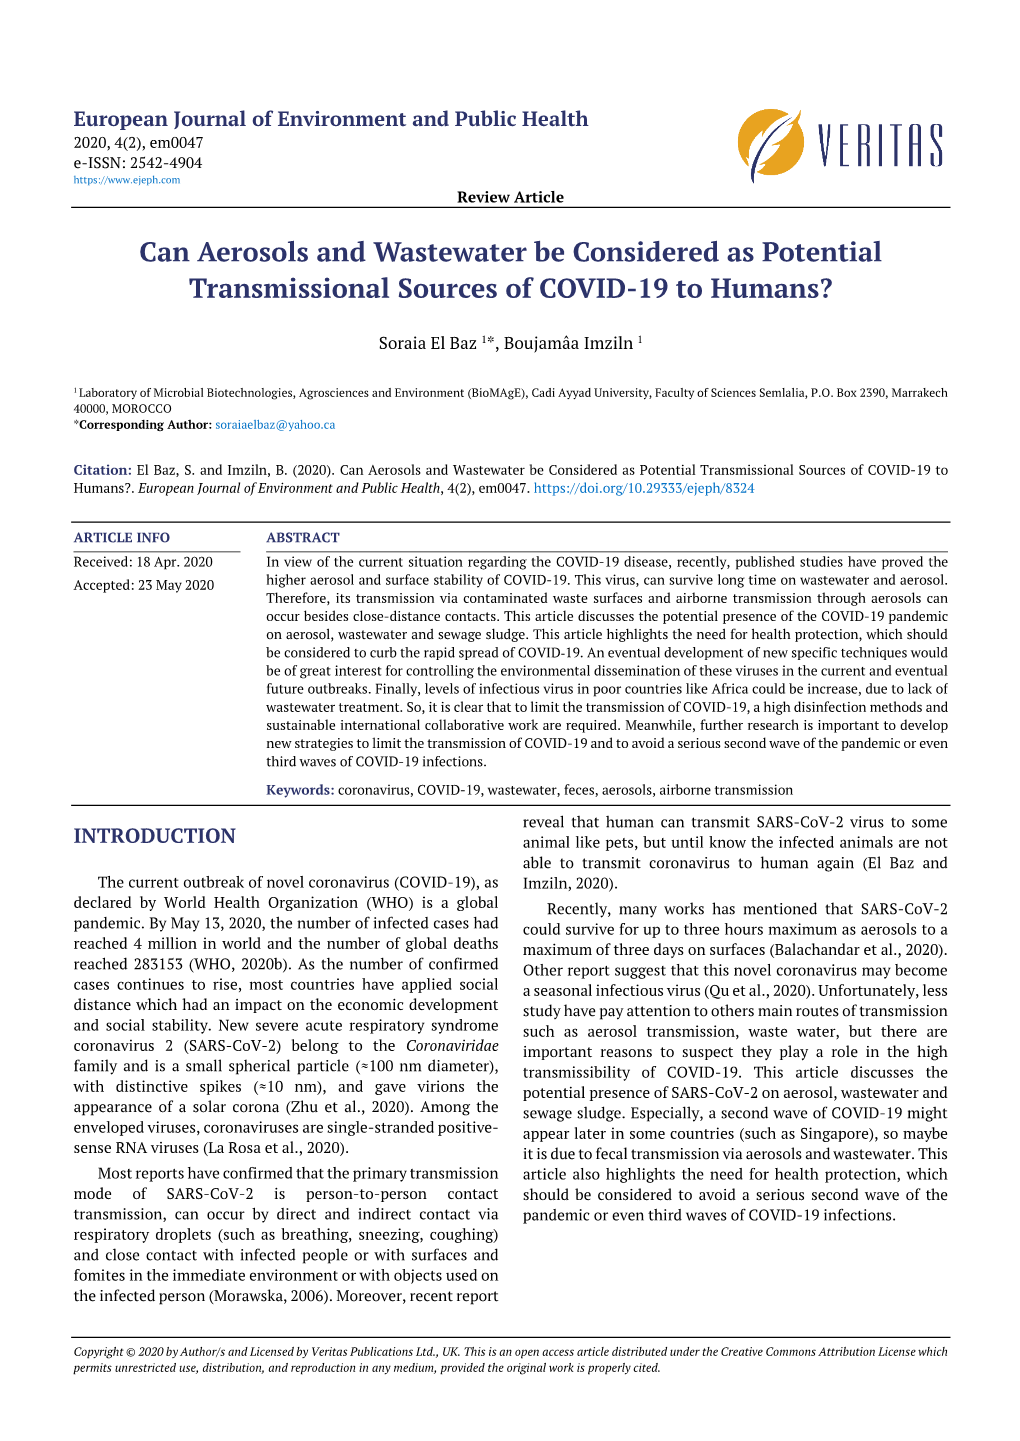 Can Aerosols and Wastewater Be Considered As Potential Transmissional Sources of COVID-19 to Humans?